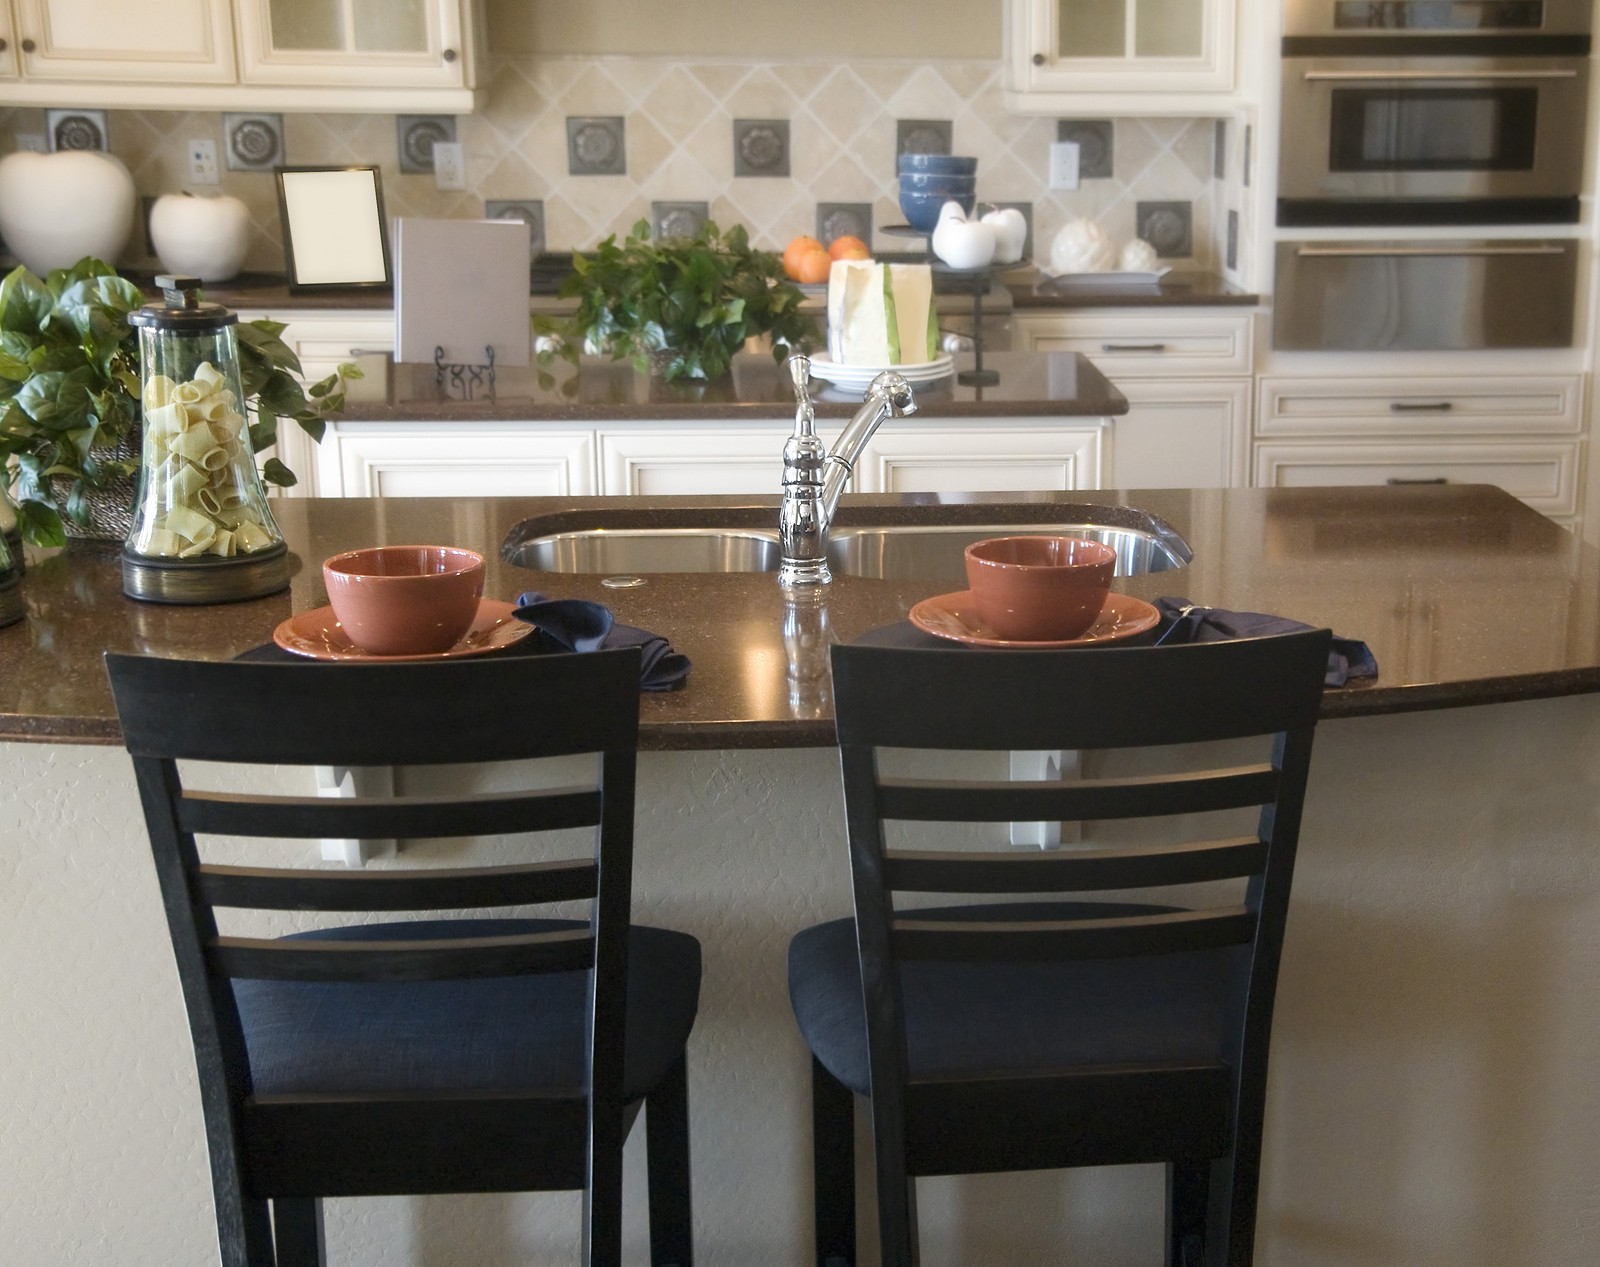 Match & Mix: Coordinating Bar Stools & Dining Chairs - Home + Style